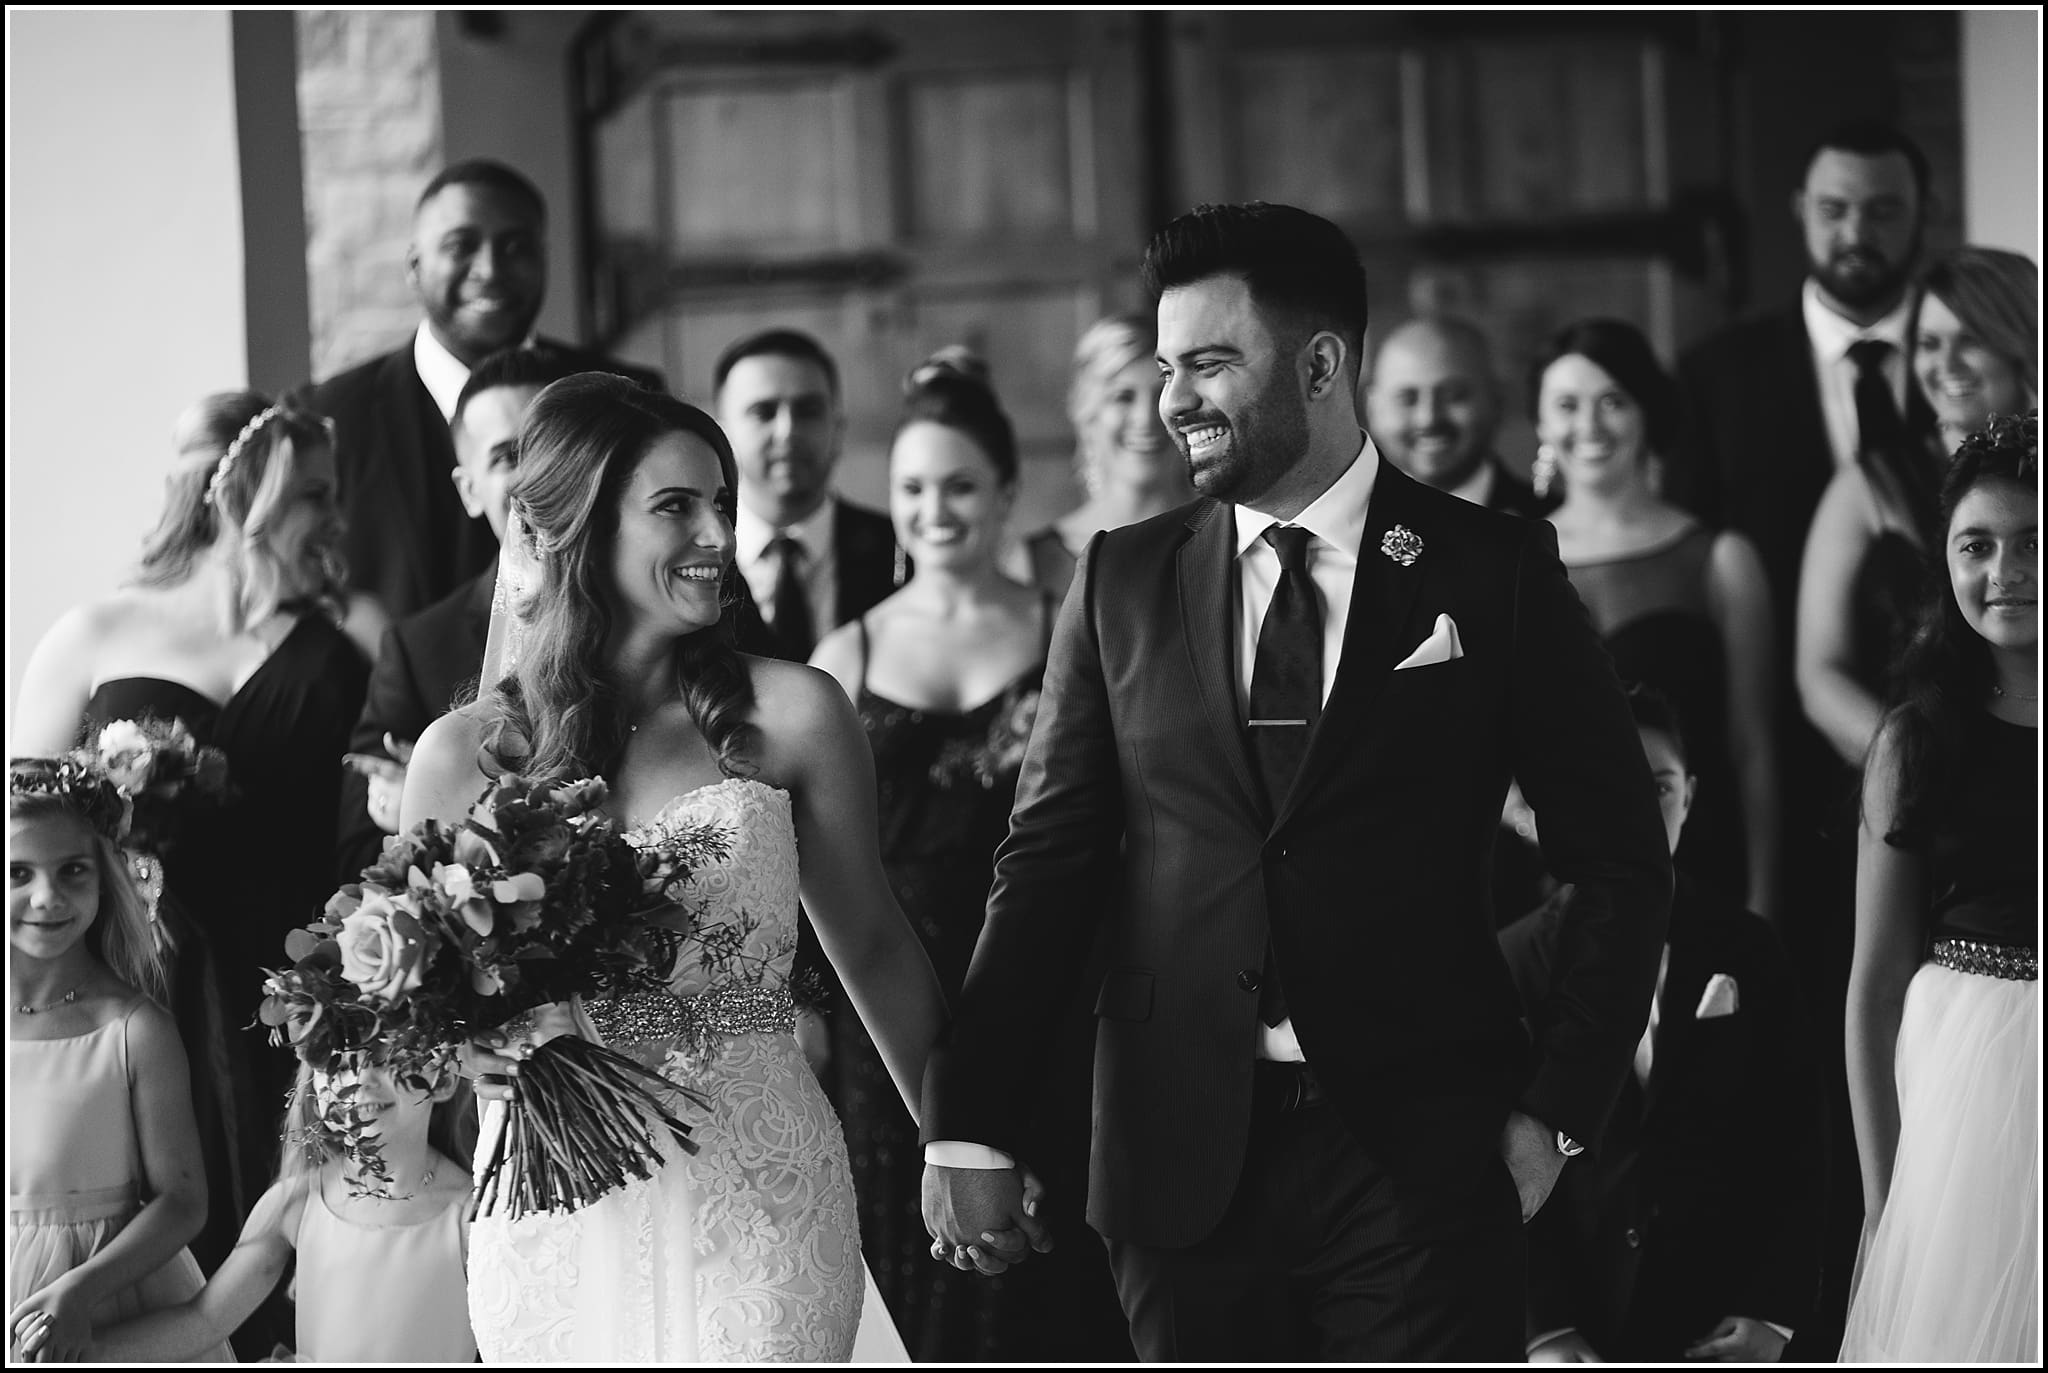  favorite wedding images 2016, wedding photos from 2016, our favorite wedding photos, casa real wedding, casa real ruby hill winery